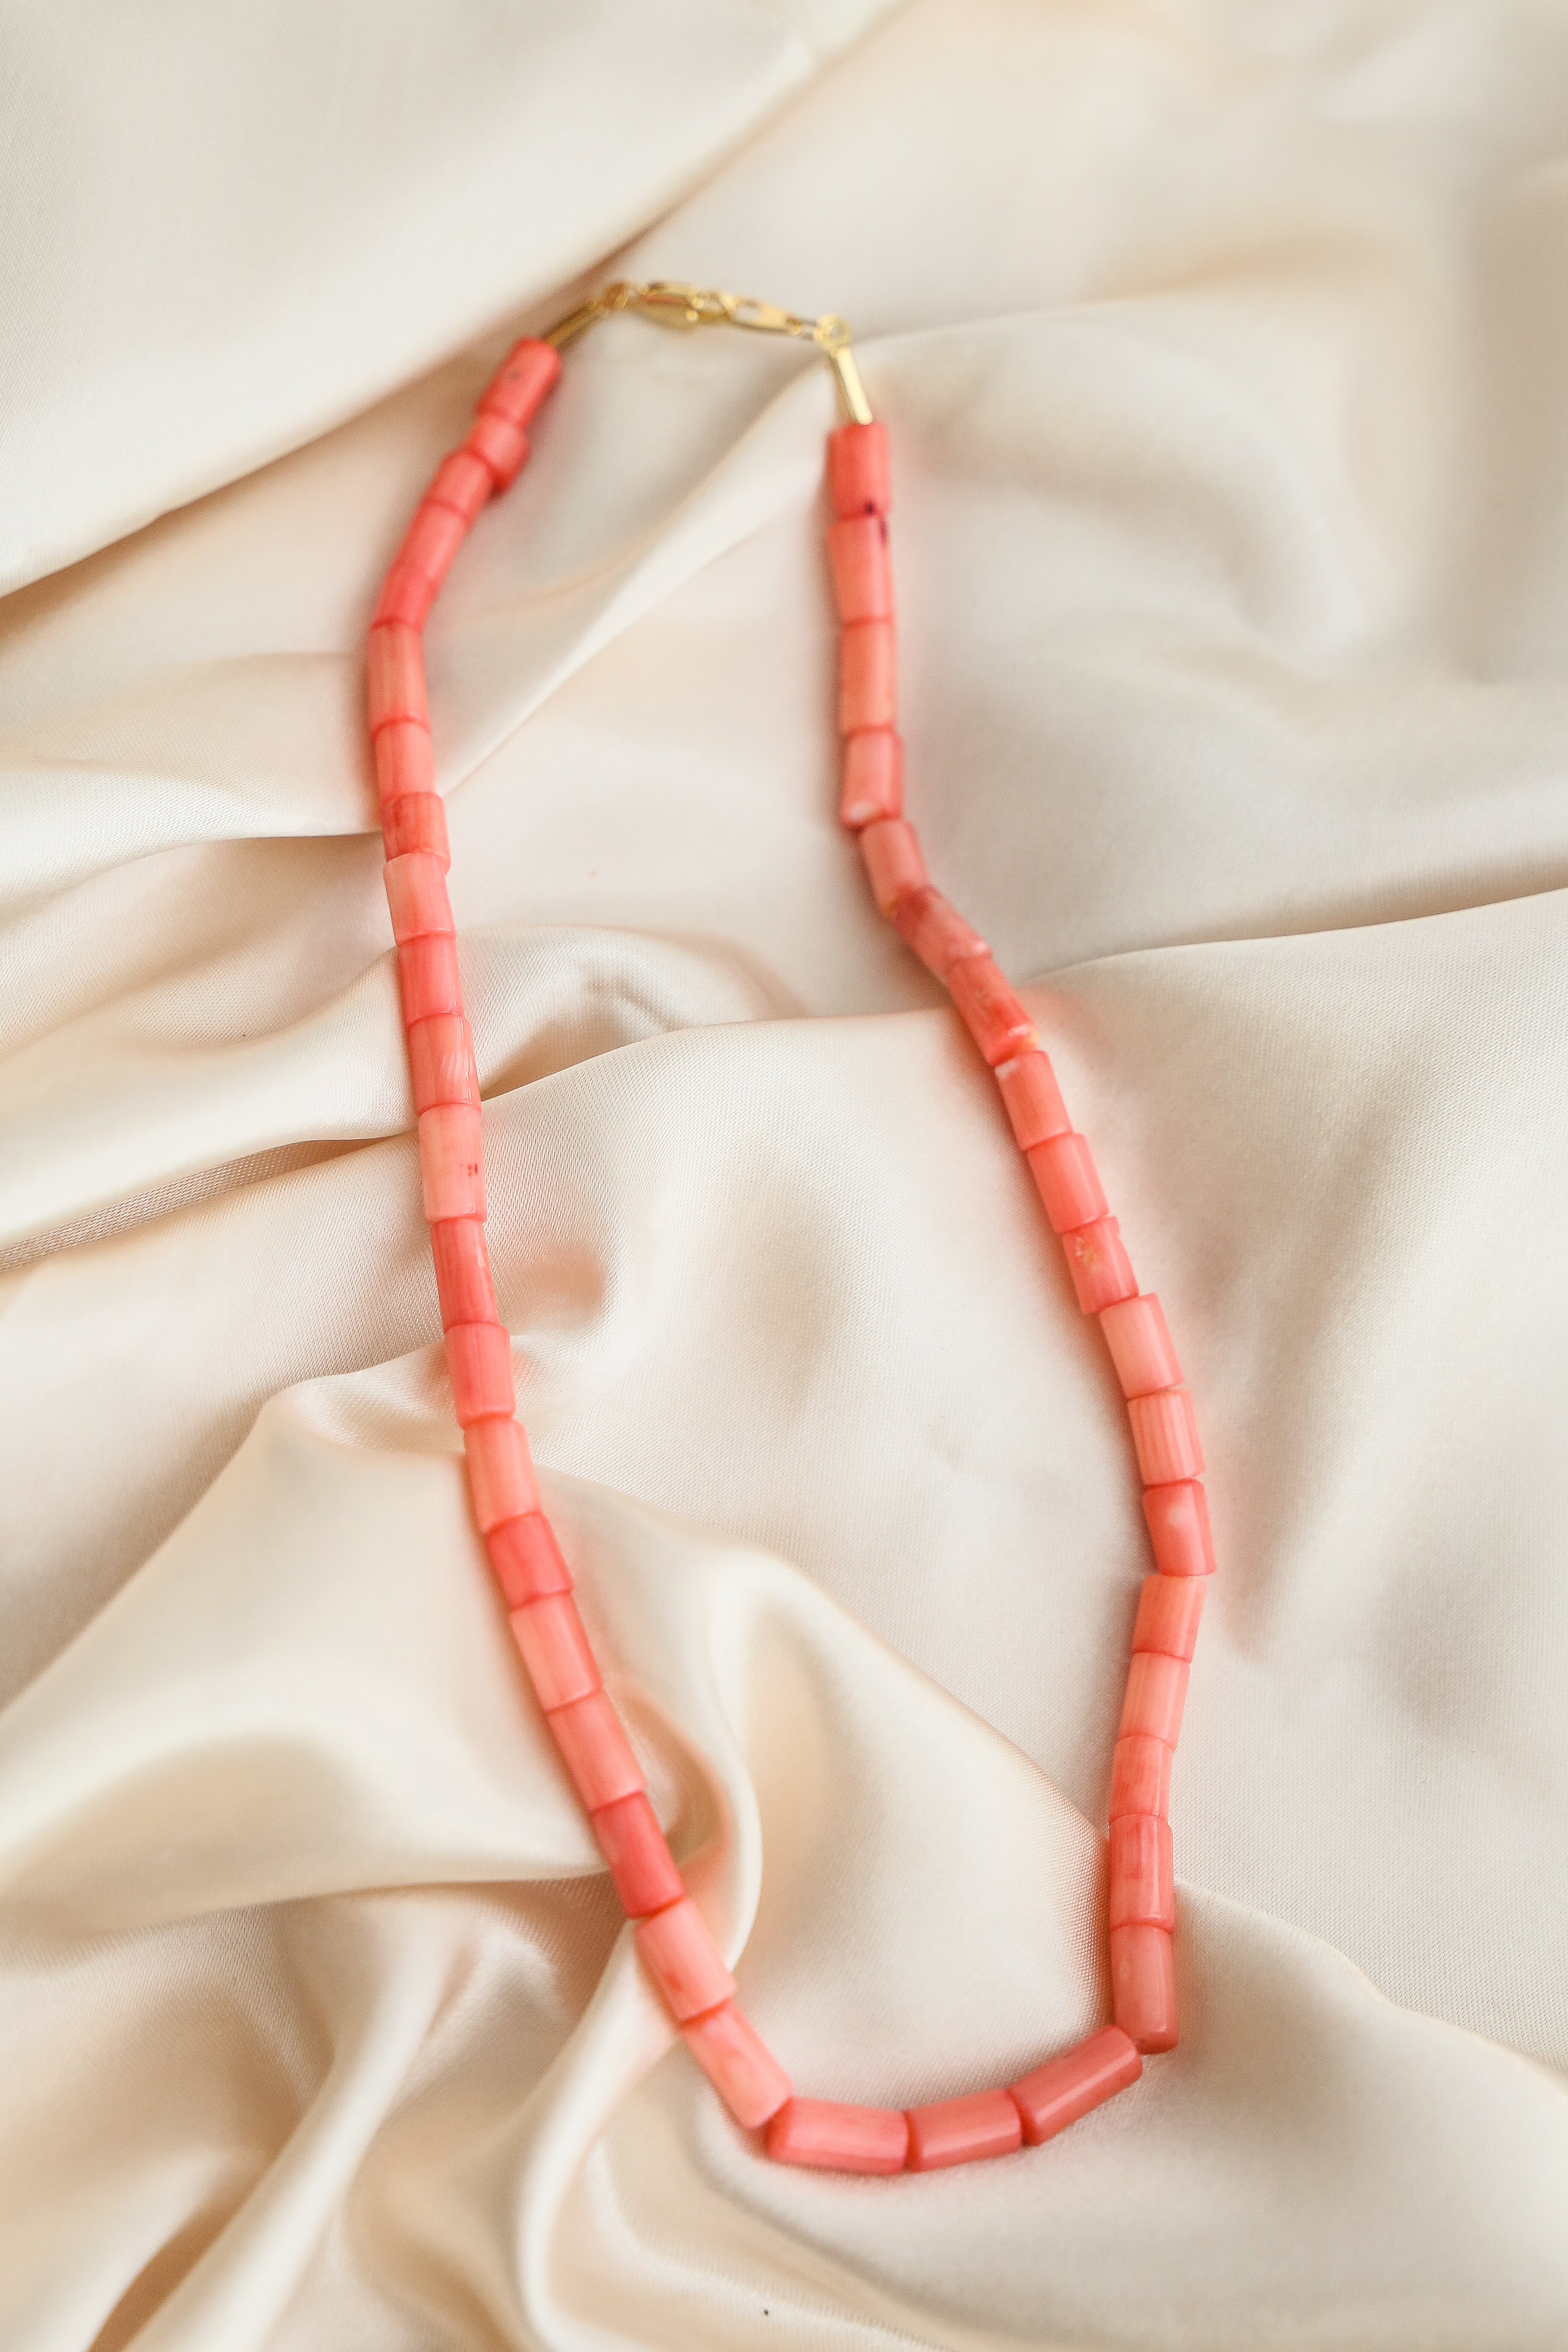 Salmon Coral Reef Necklace - Boutique Minimaliste has waterproof, durable, elegant and vintage inspired jewelry